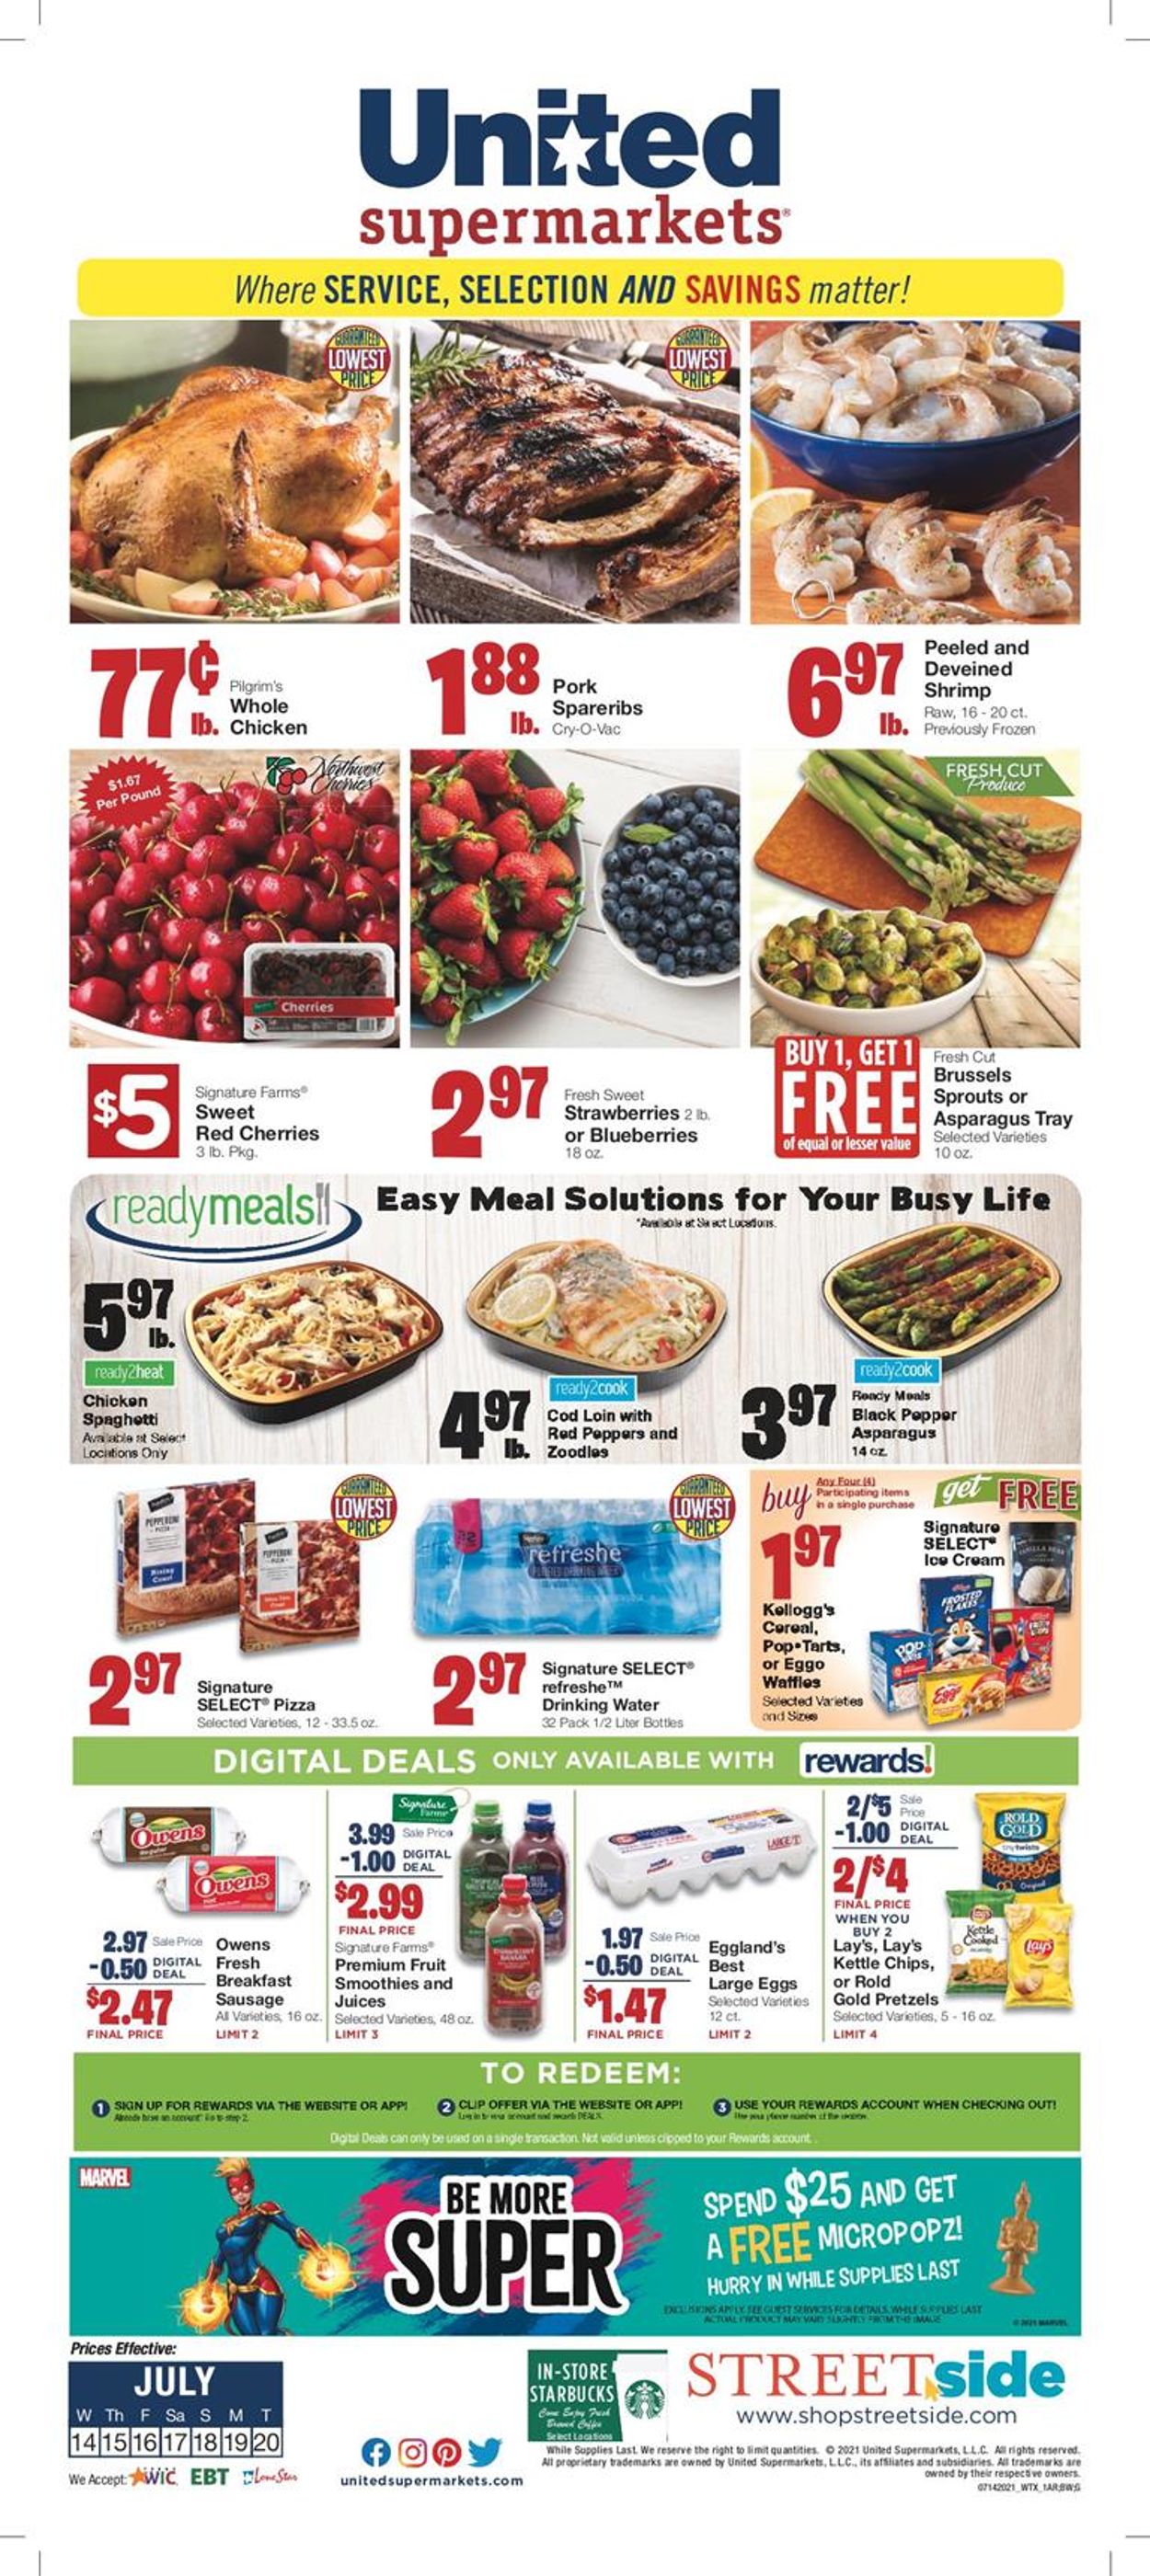 United Supermarkets Current weekly ad 07/14 - 07/20/2021 - frequent-ads.com